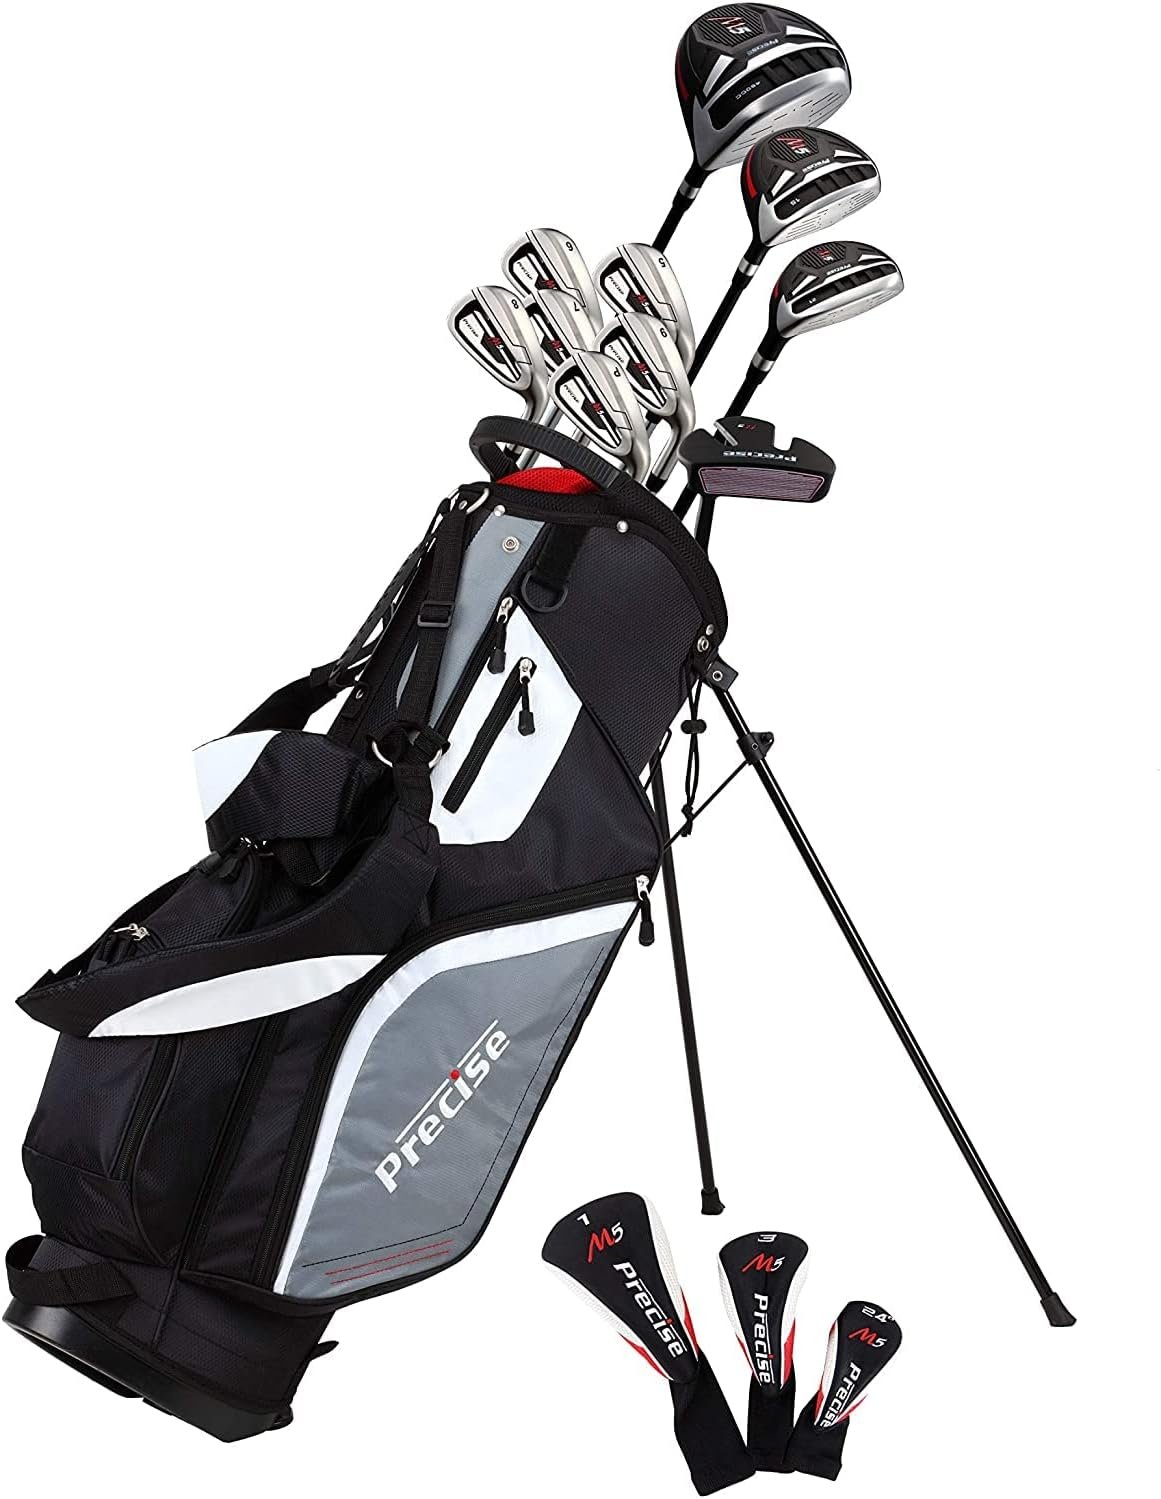 Precise M5 Mens Complete Golf Clubs Package Set Includes Titanium Driver, S.S. Fairway, S.S. Hybrid, S.S. 5-PW Irons, Putter, Stand Bag, 3 H/Cs